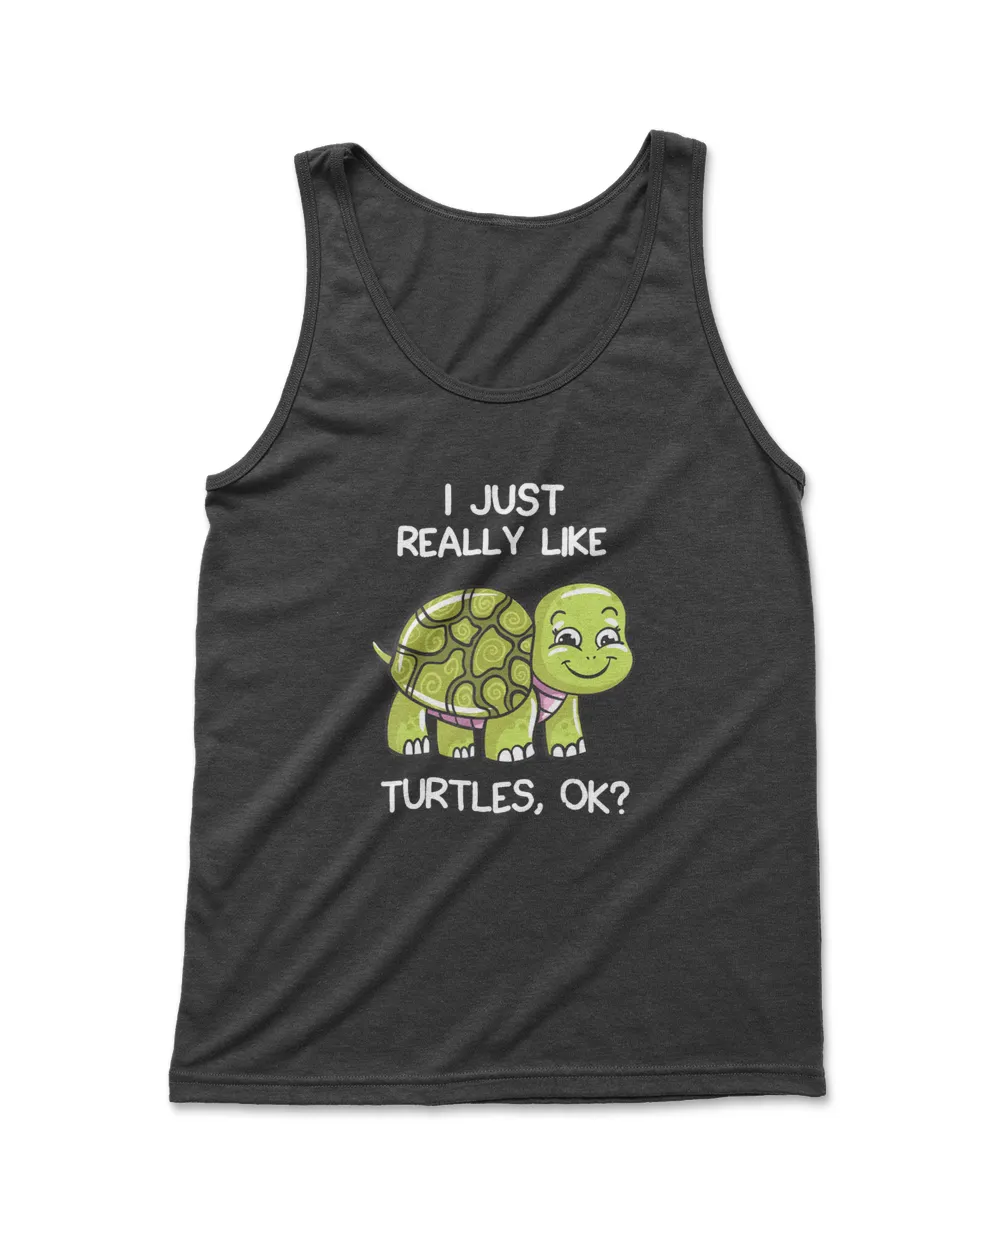 I Just Really Like Turtles, OK Lover Gift Cute Turtle Love T-Shirt